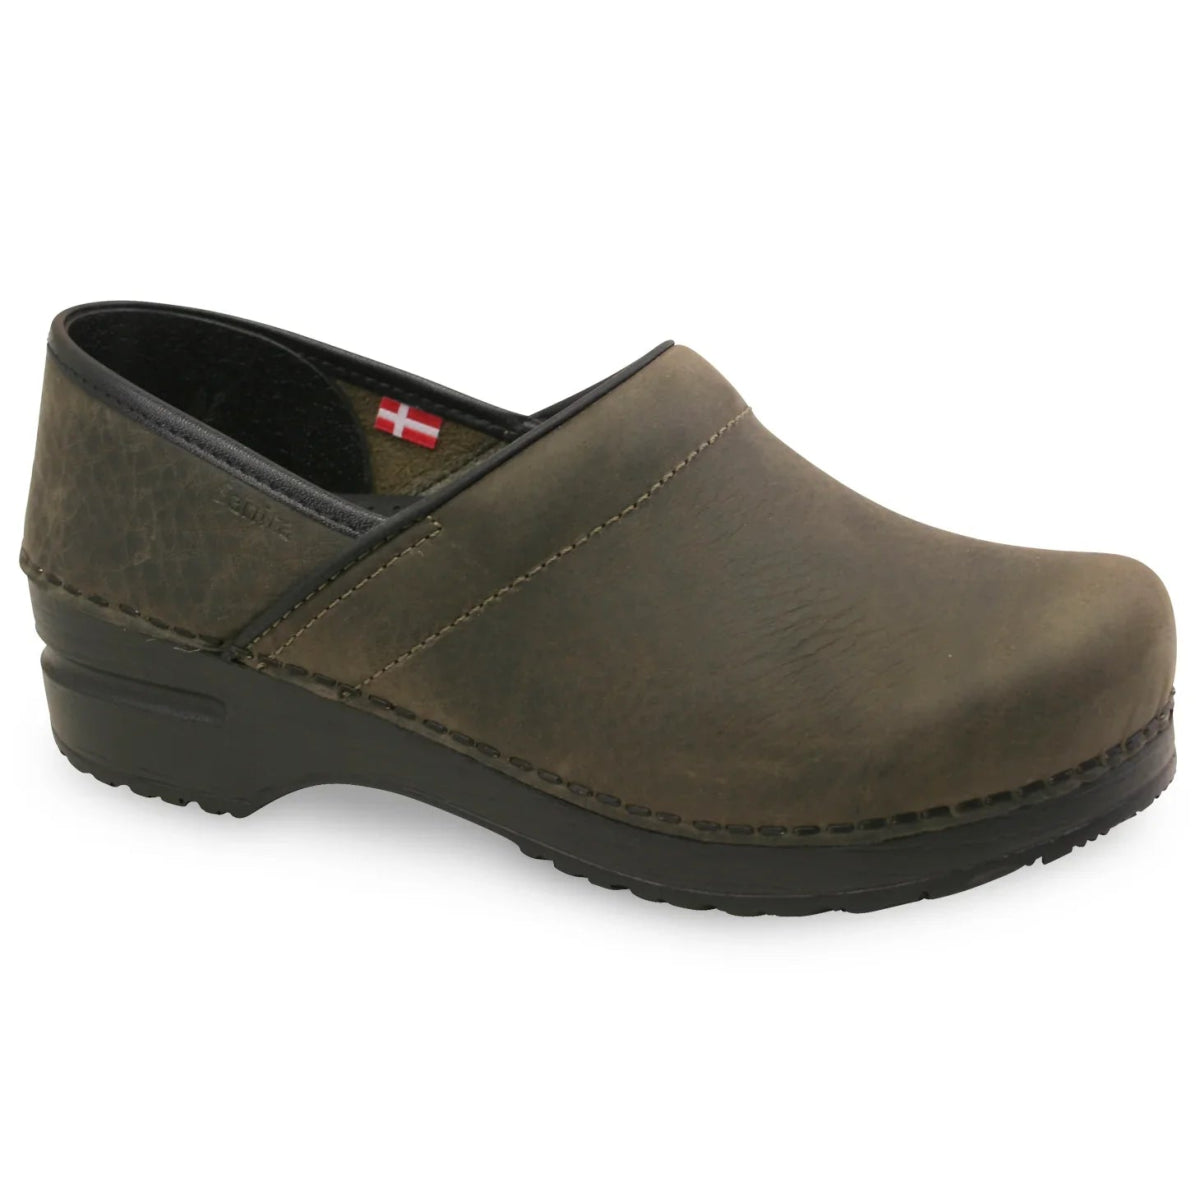 SANITA PROFESSIONAL SMOOTH OILED LEATHER WOMEN CLOG IN OLIVE - TLW Shoes